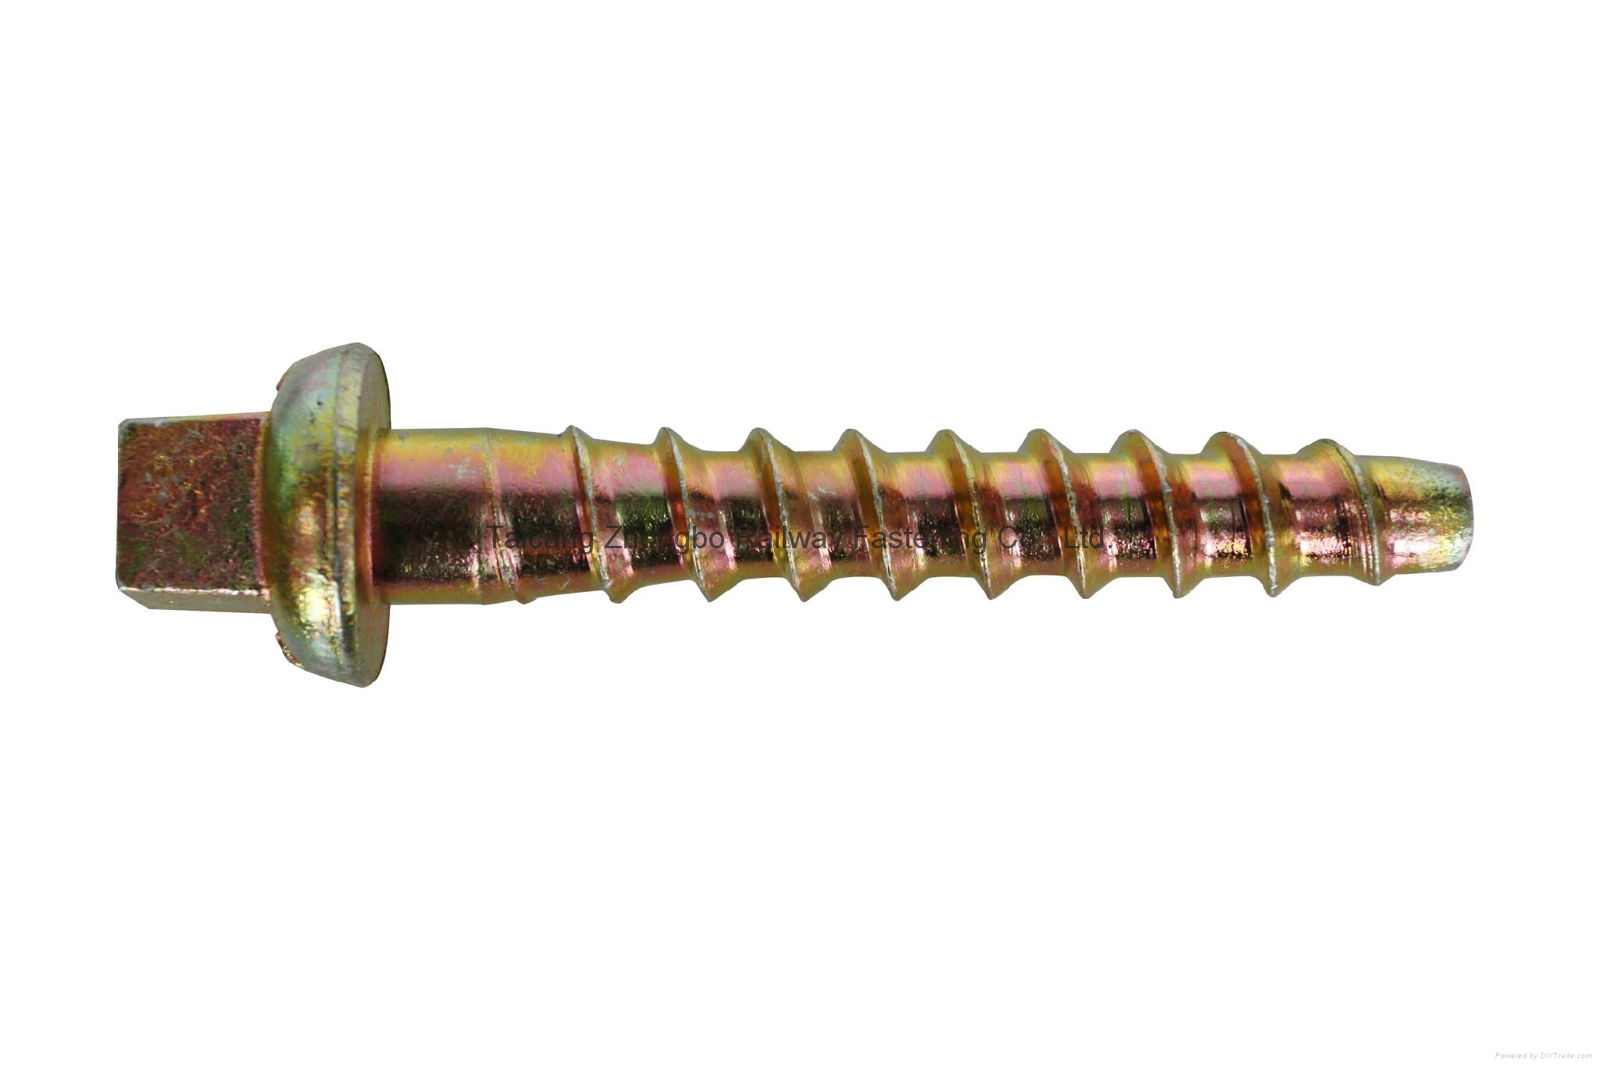 Screw spikes used in tie plates 5